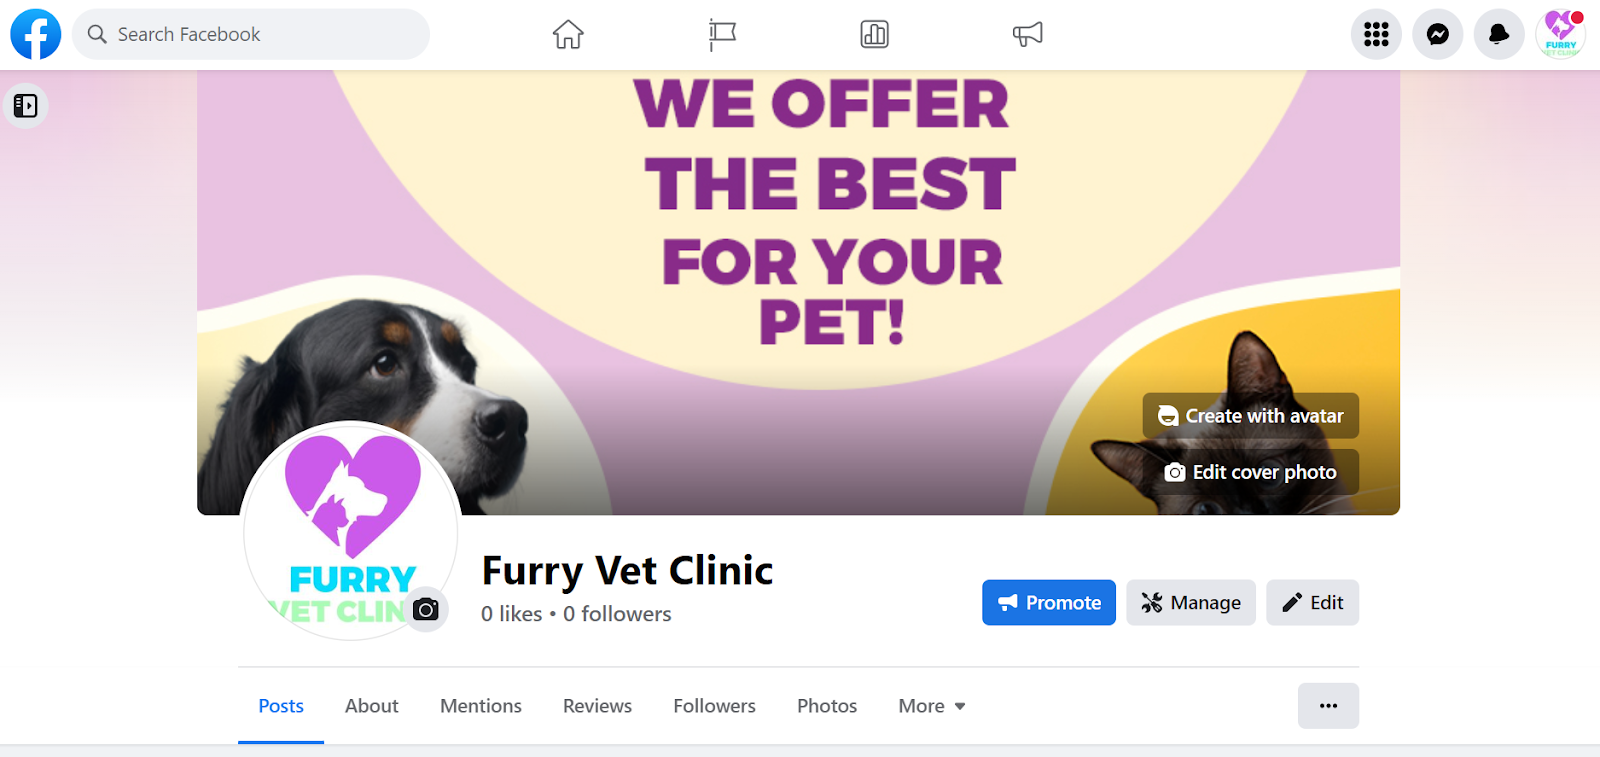 An example of a veterinary clinic using Facebook for marketing and reaching their desired audience.